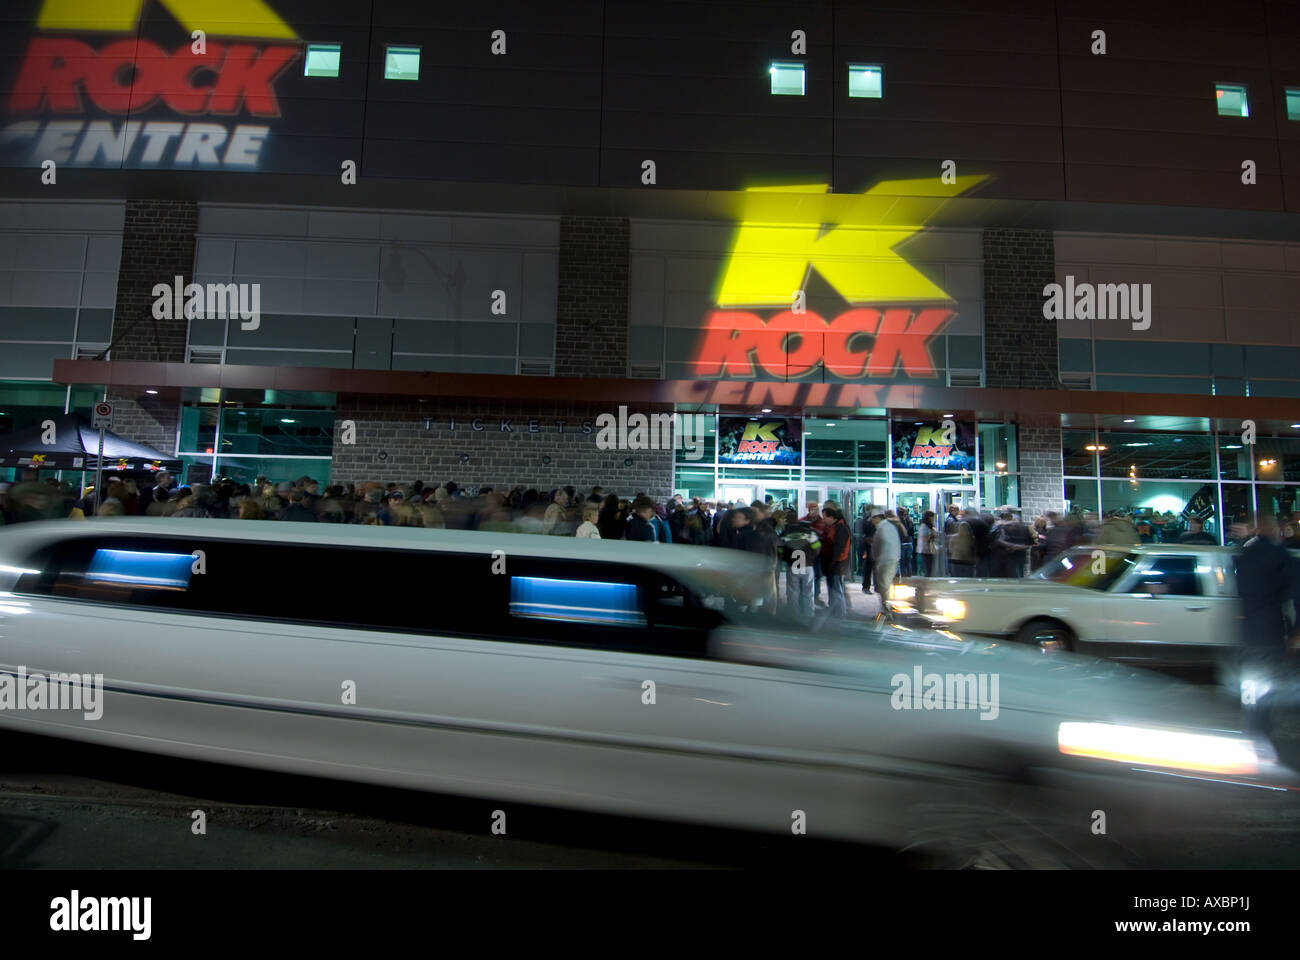 Stretch limos sip in and out dropping of concertgoers at the new K Rock Centre for the Tragically Hip Kingston Ontario Feb 23 08 Stock Photo